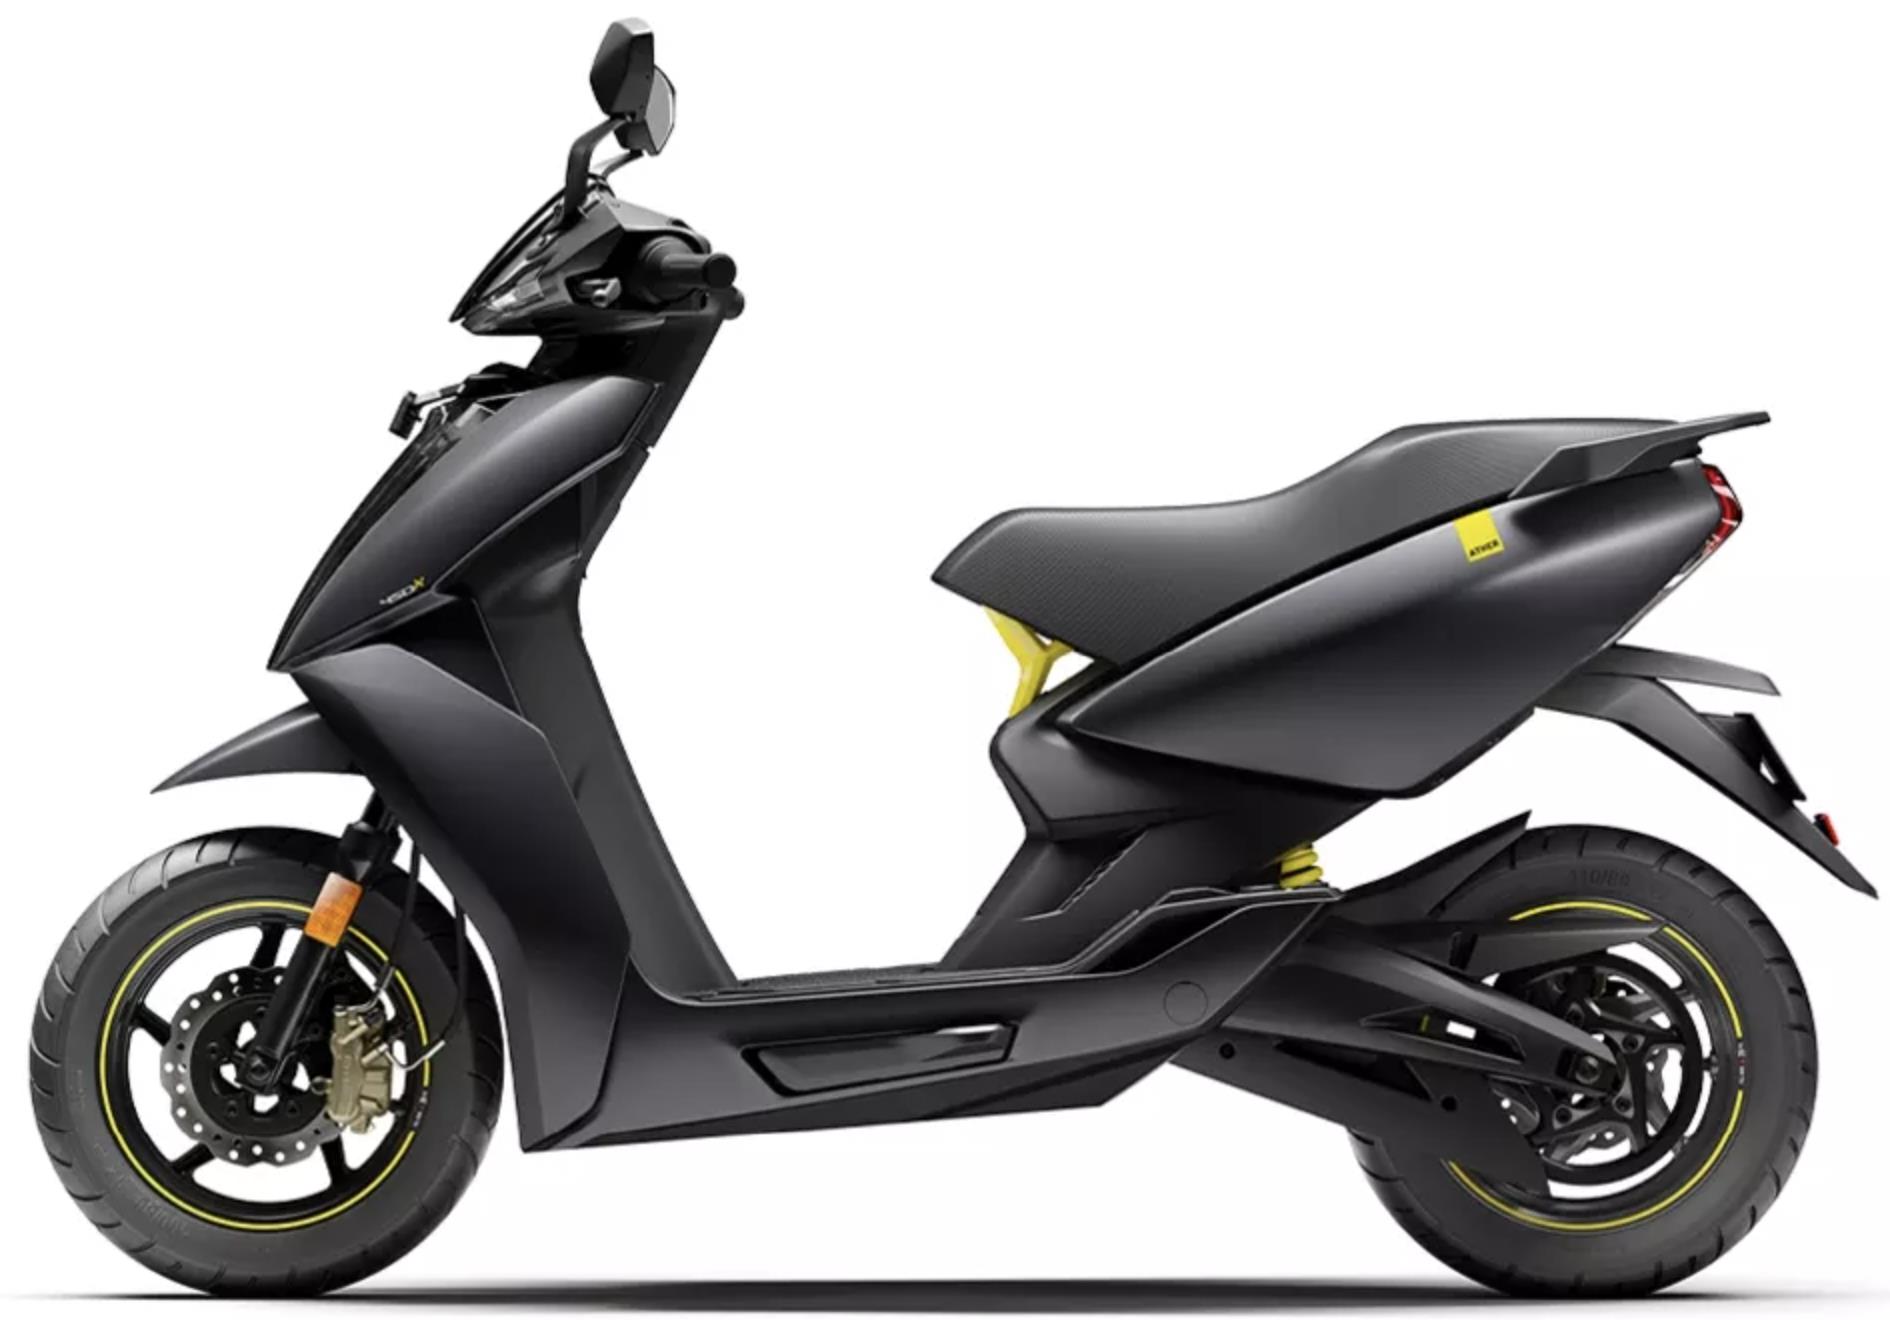 Ather Electric Scooter Price, Specs, Review, Pics & Mileage in India